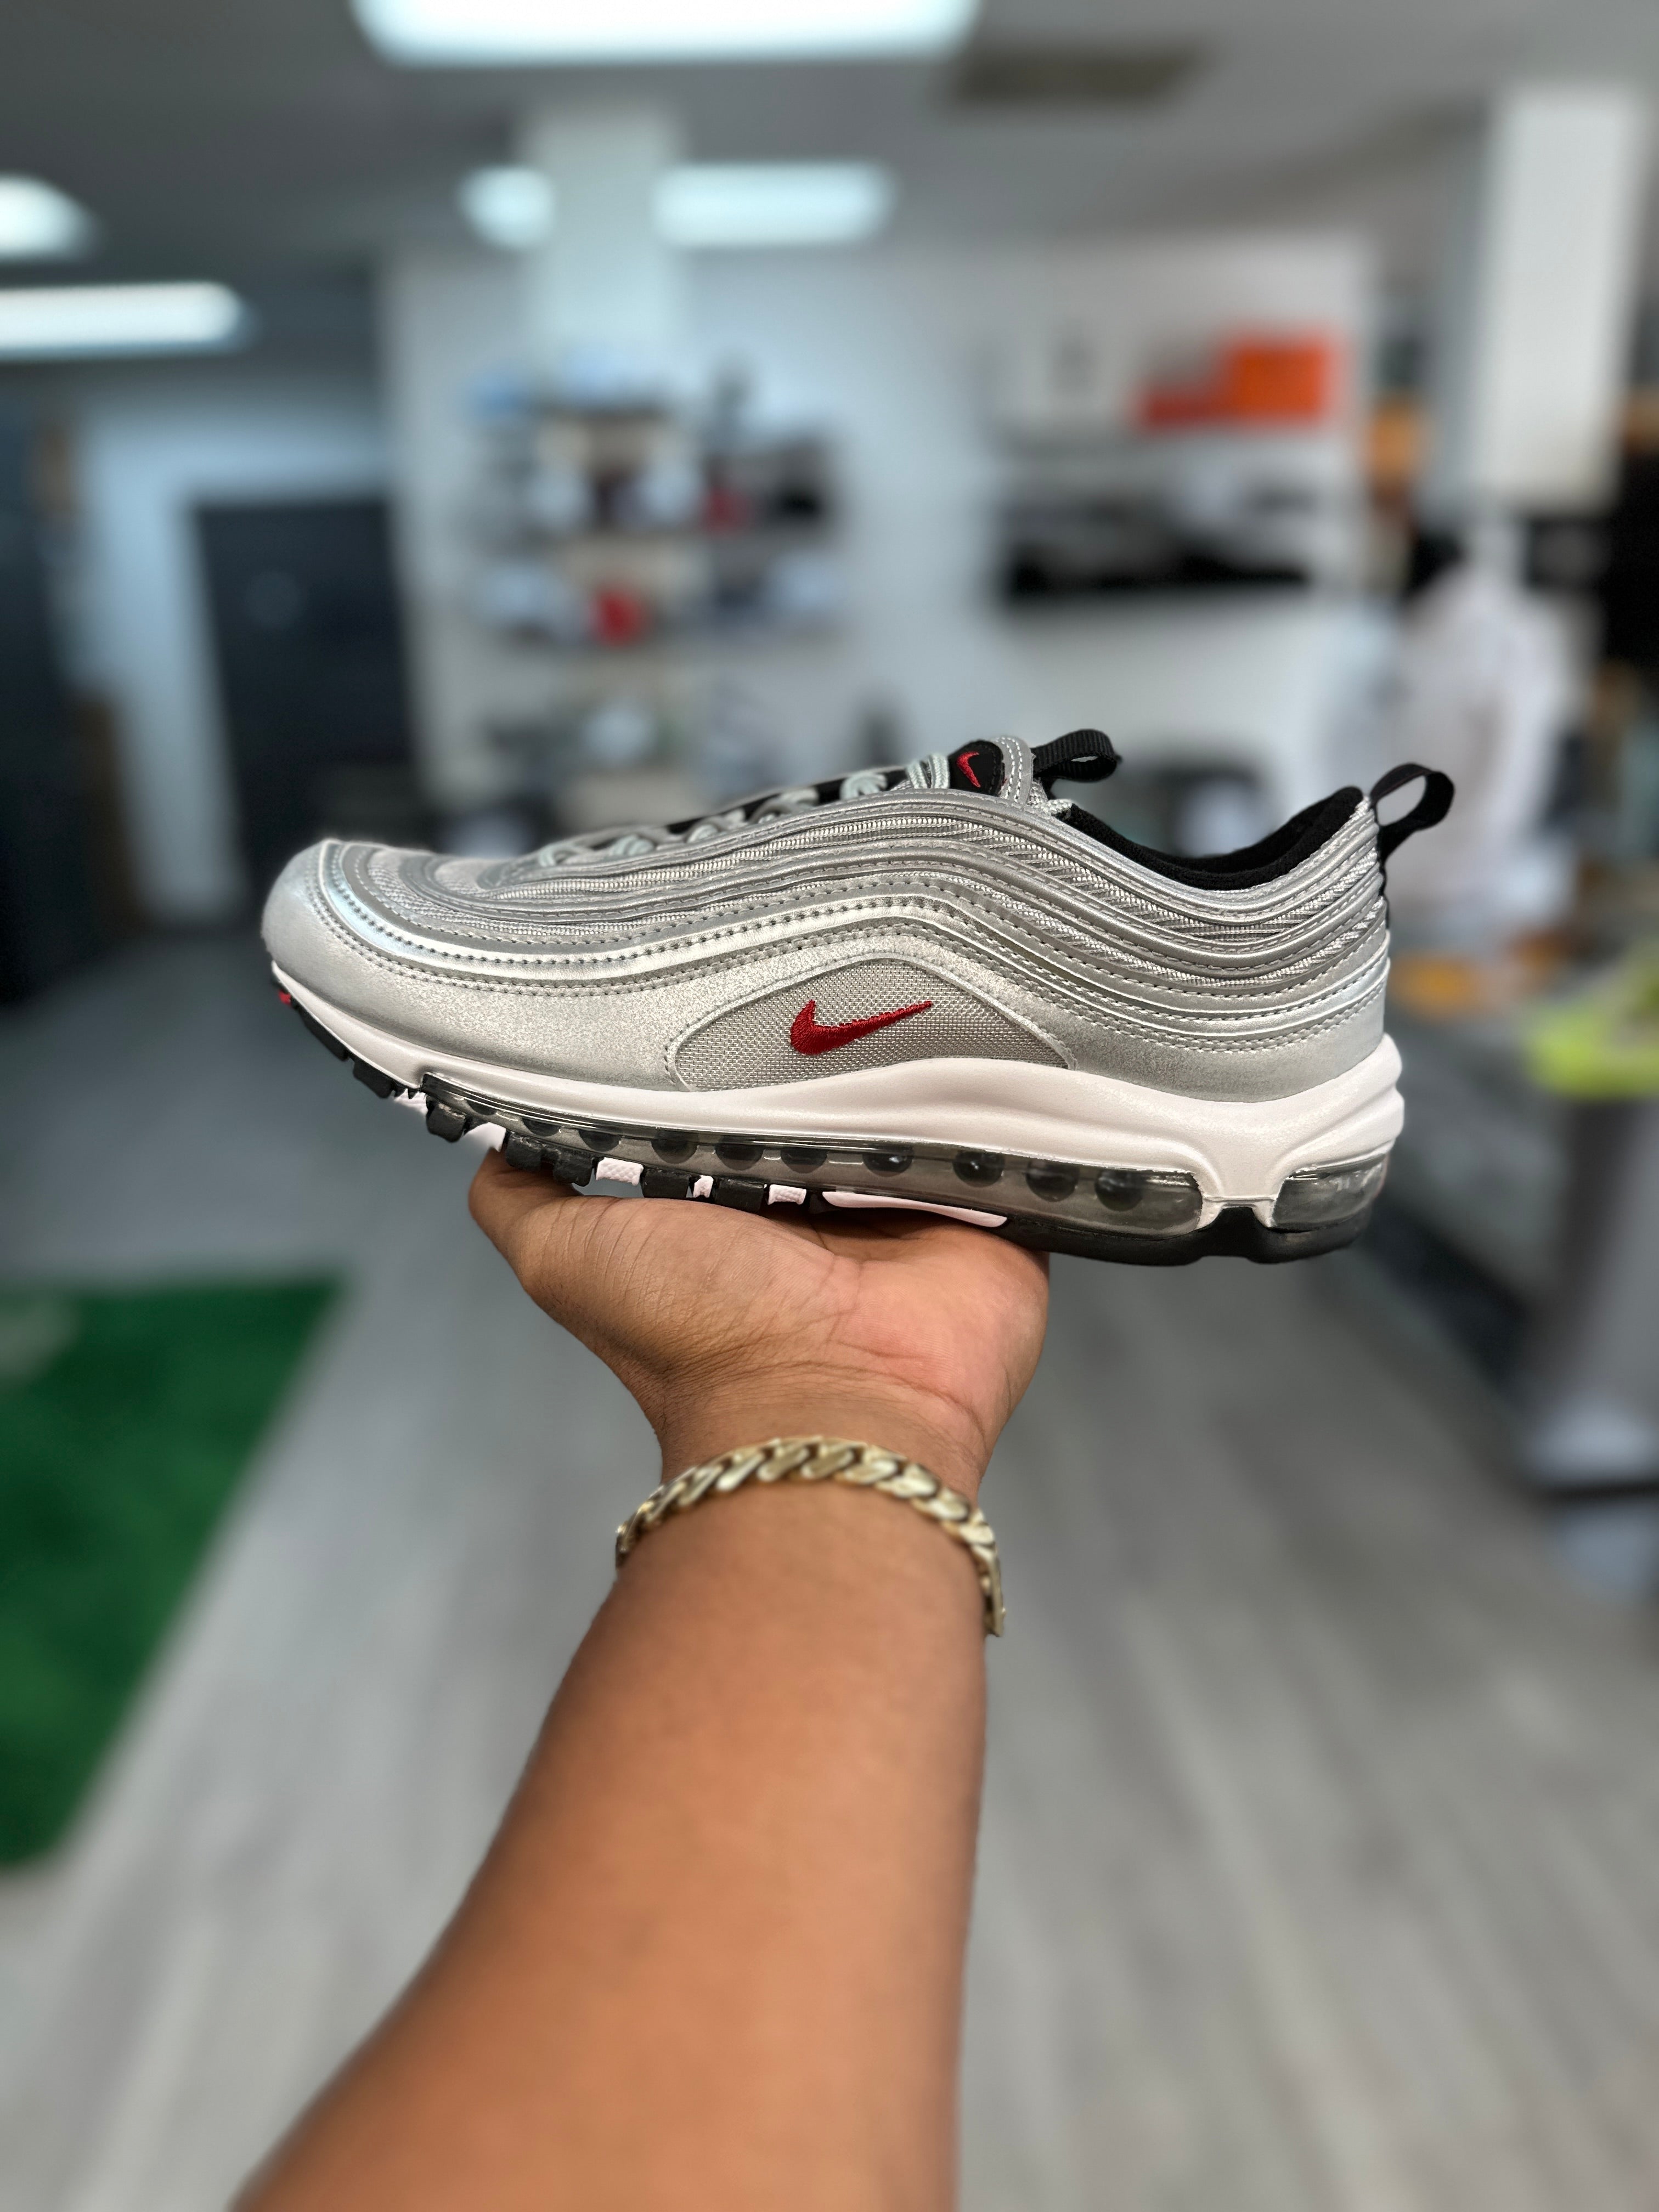 Lam Hallo De volgende OG Silver Bullet Nike Air Max 97 - Luxuries By Luck